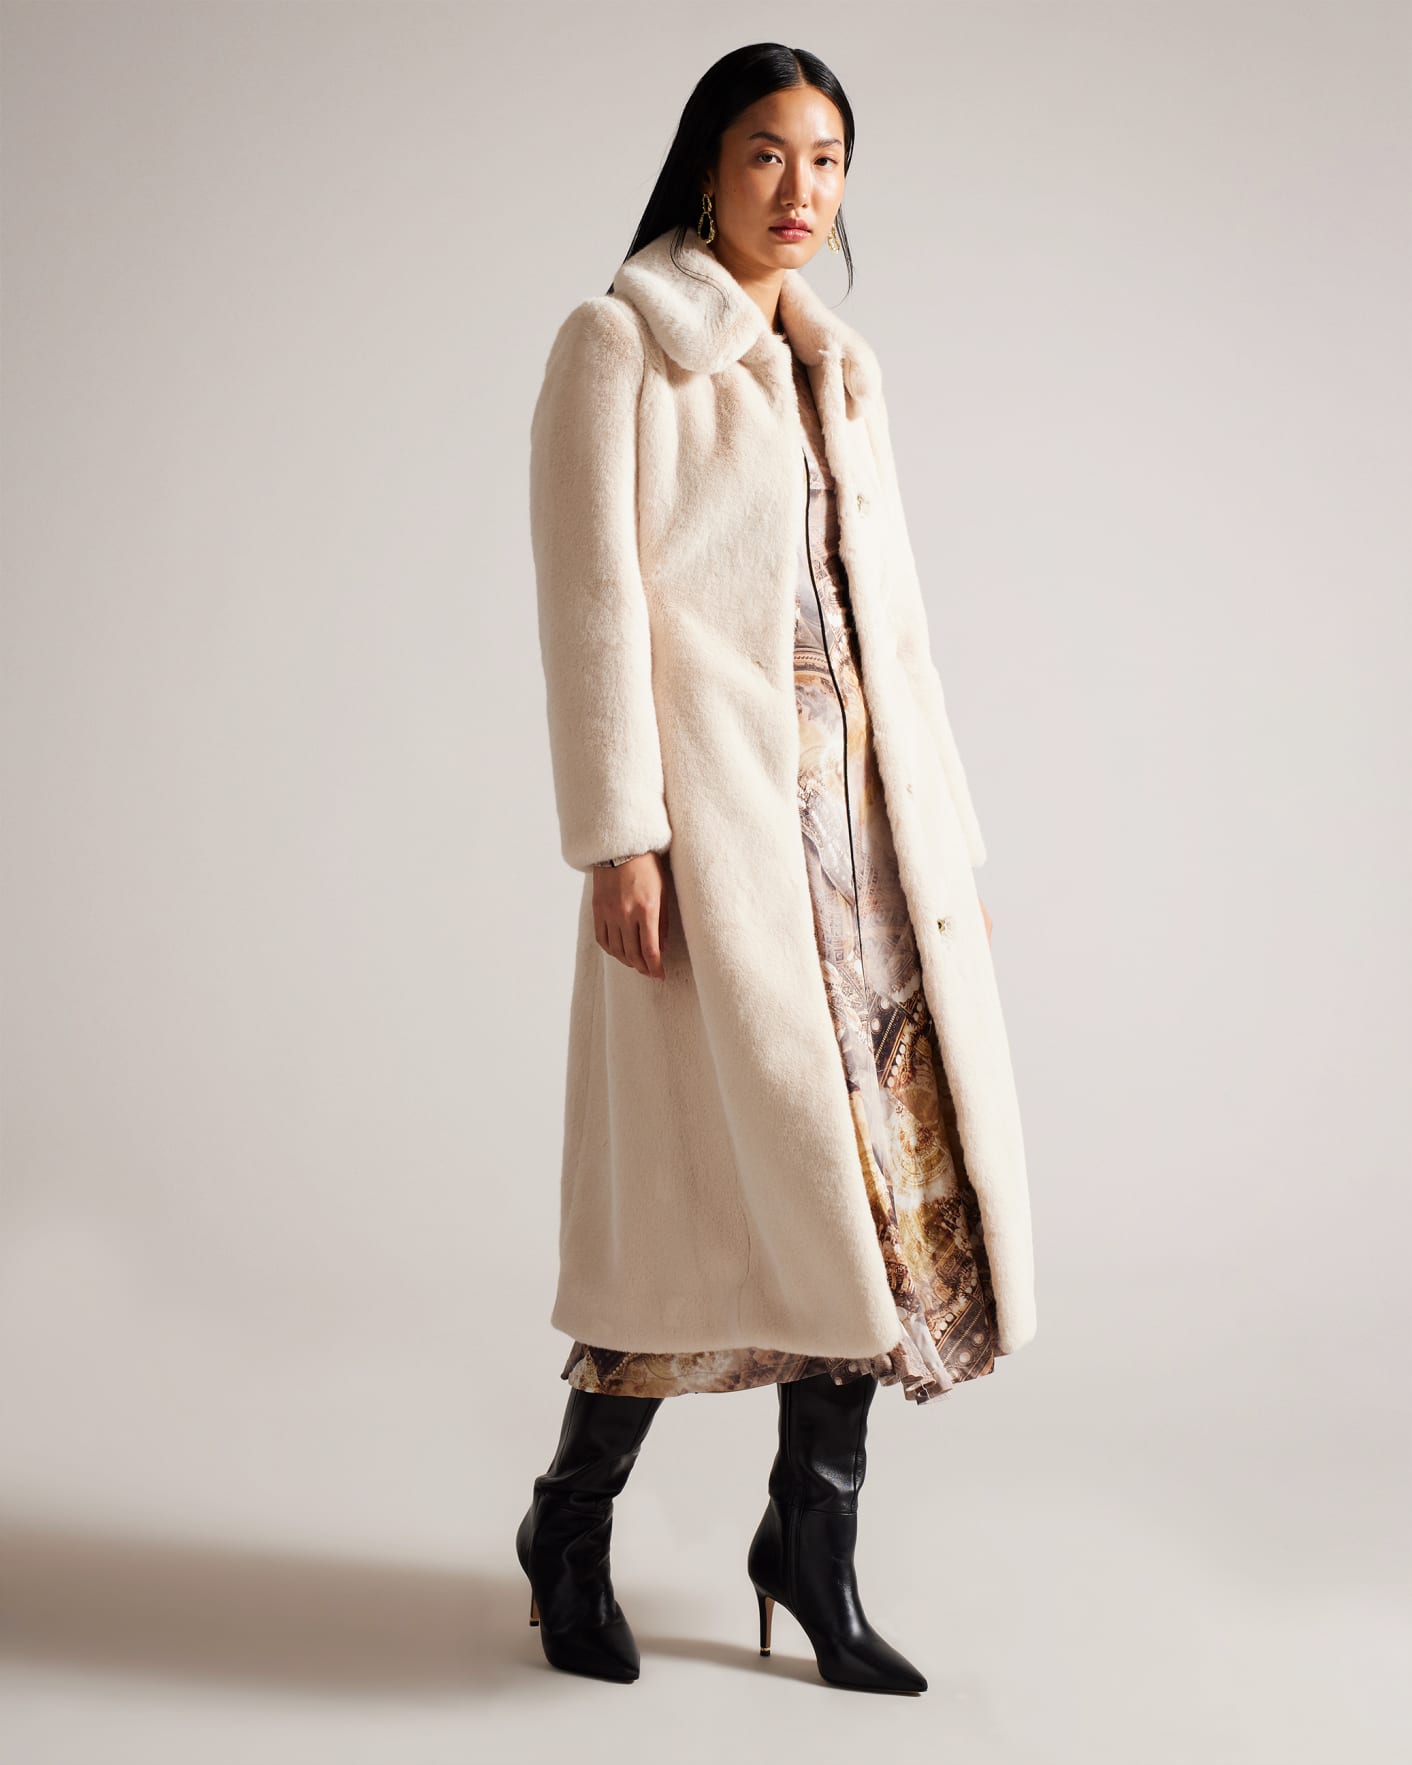 LILIMMA IVORY Faux Fur Coats Ted Baker ROW, 50% OFF